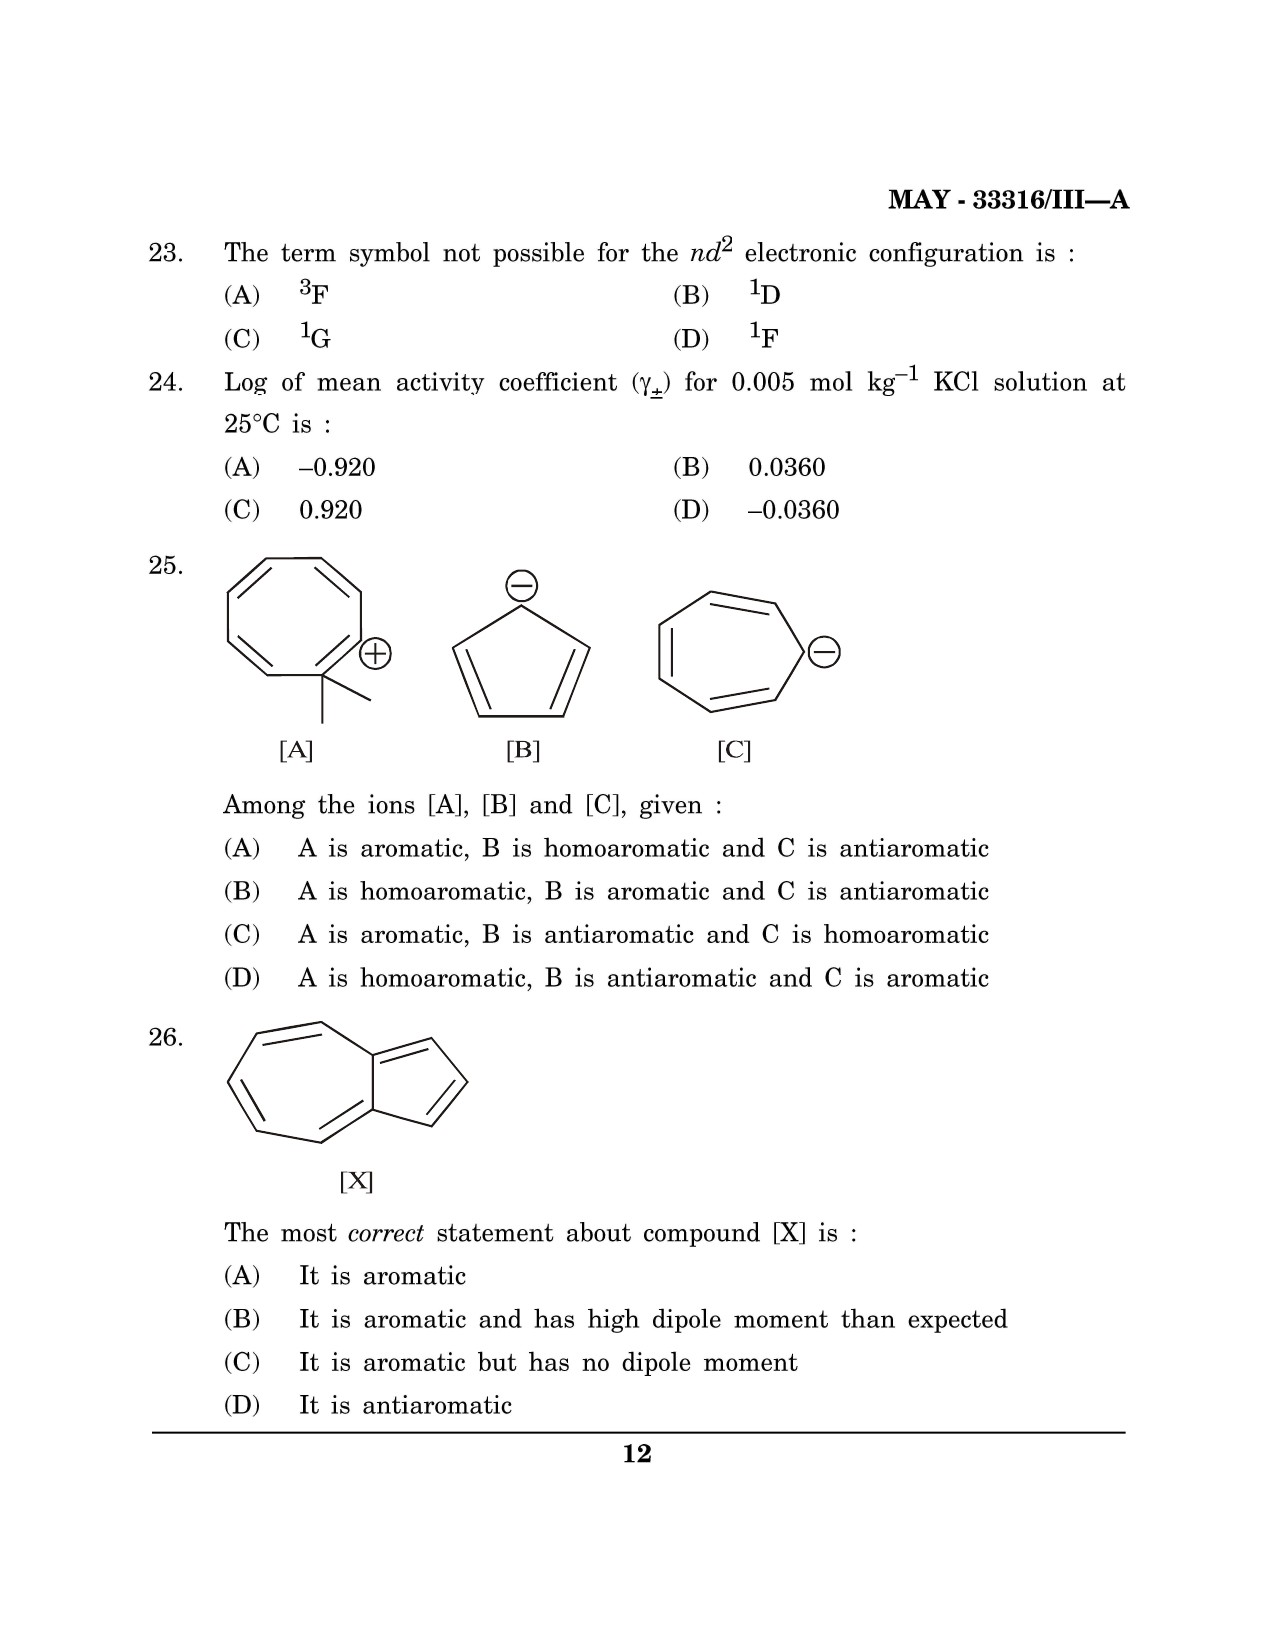 Maharashtra SET Chemical Sciences Question Paper III May 2016 11